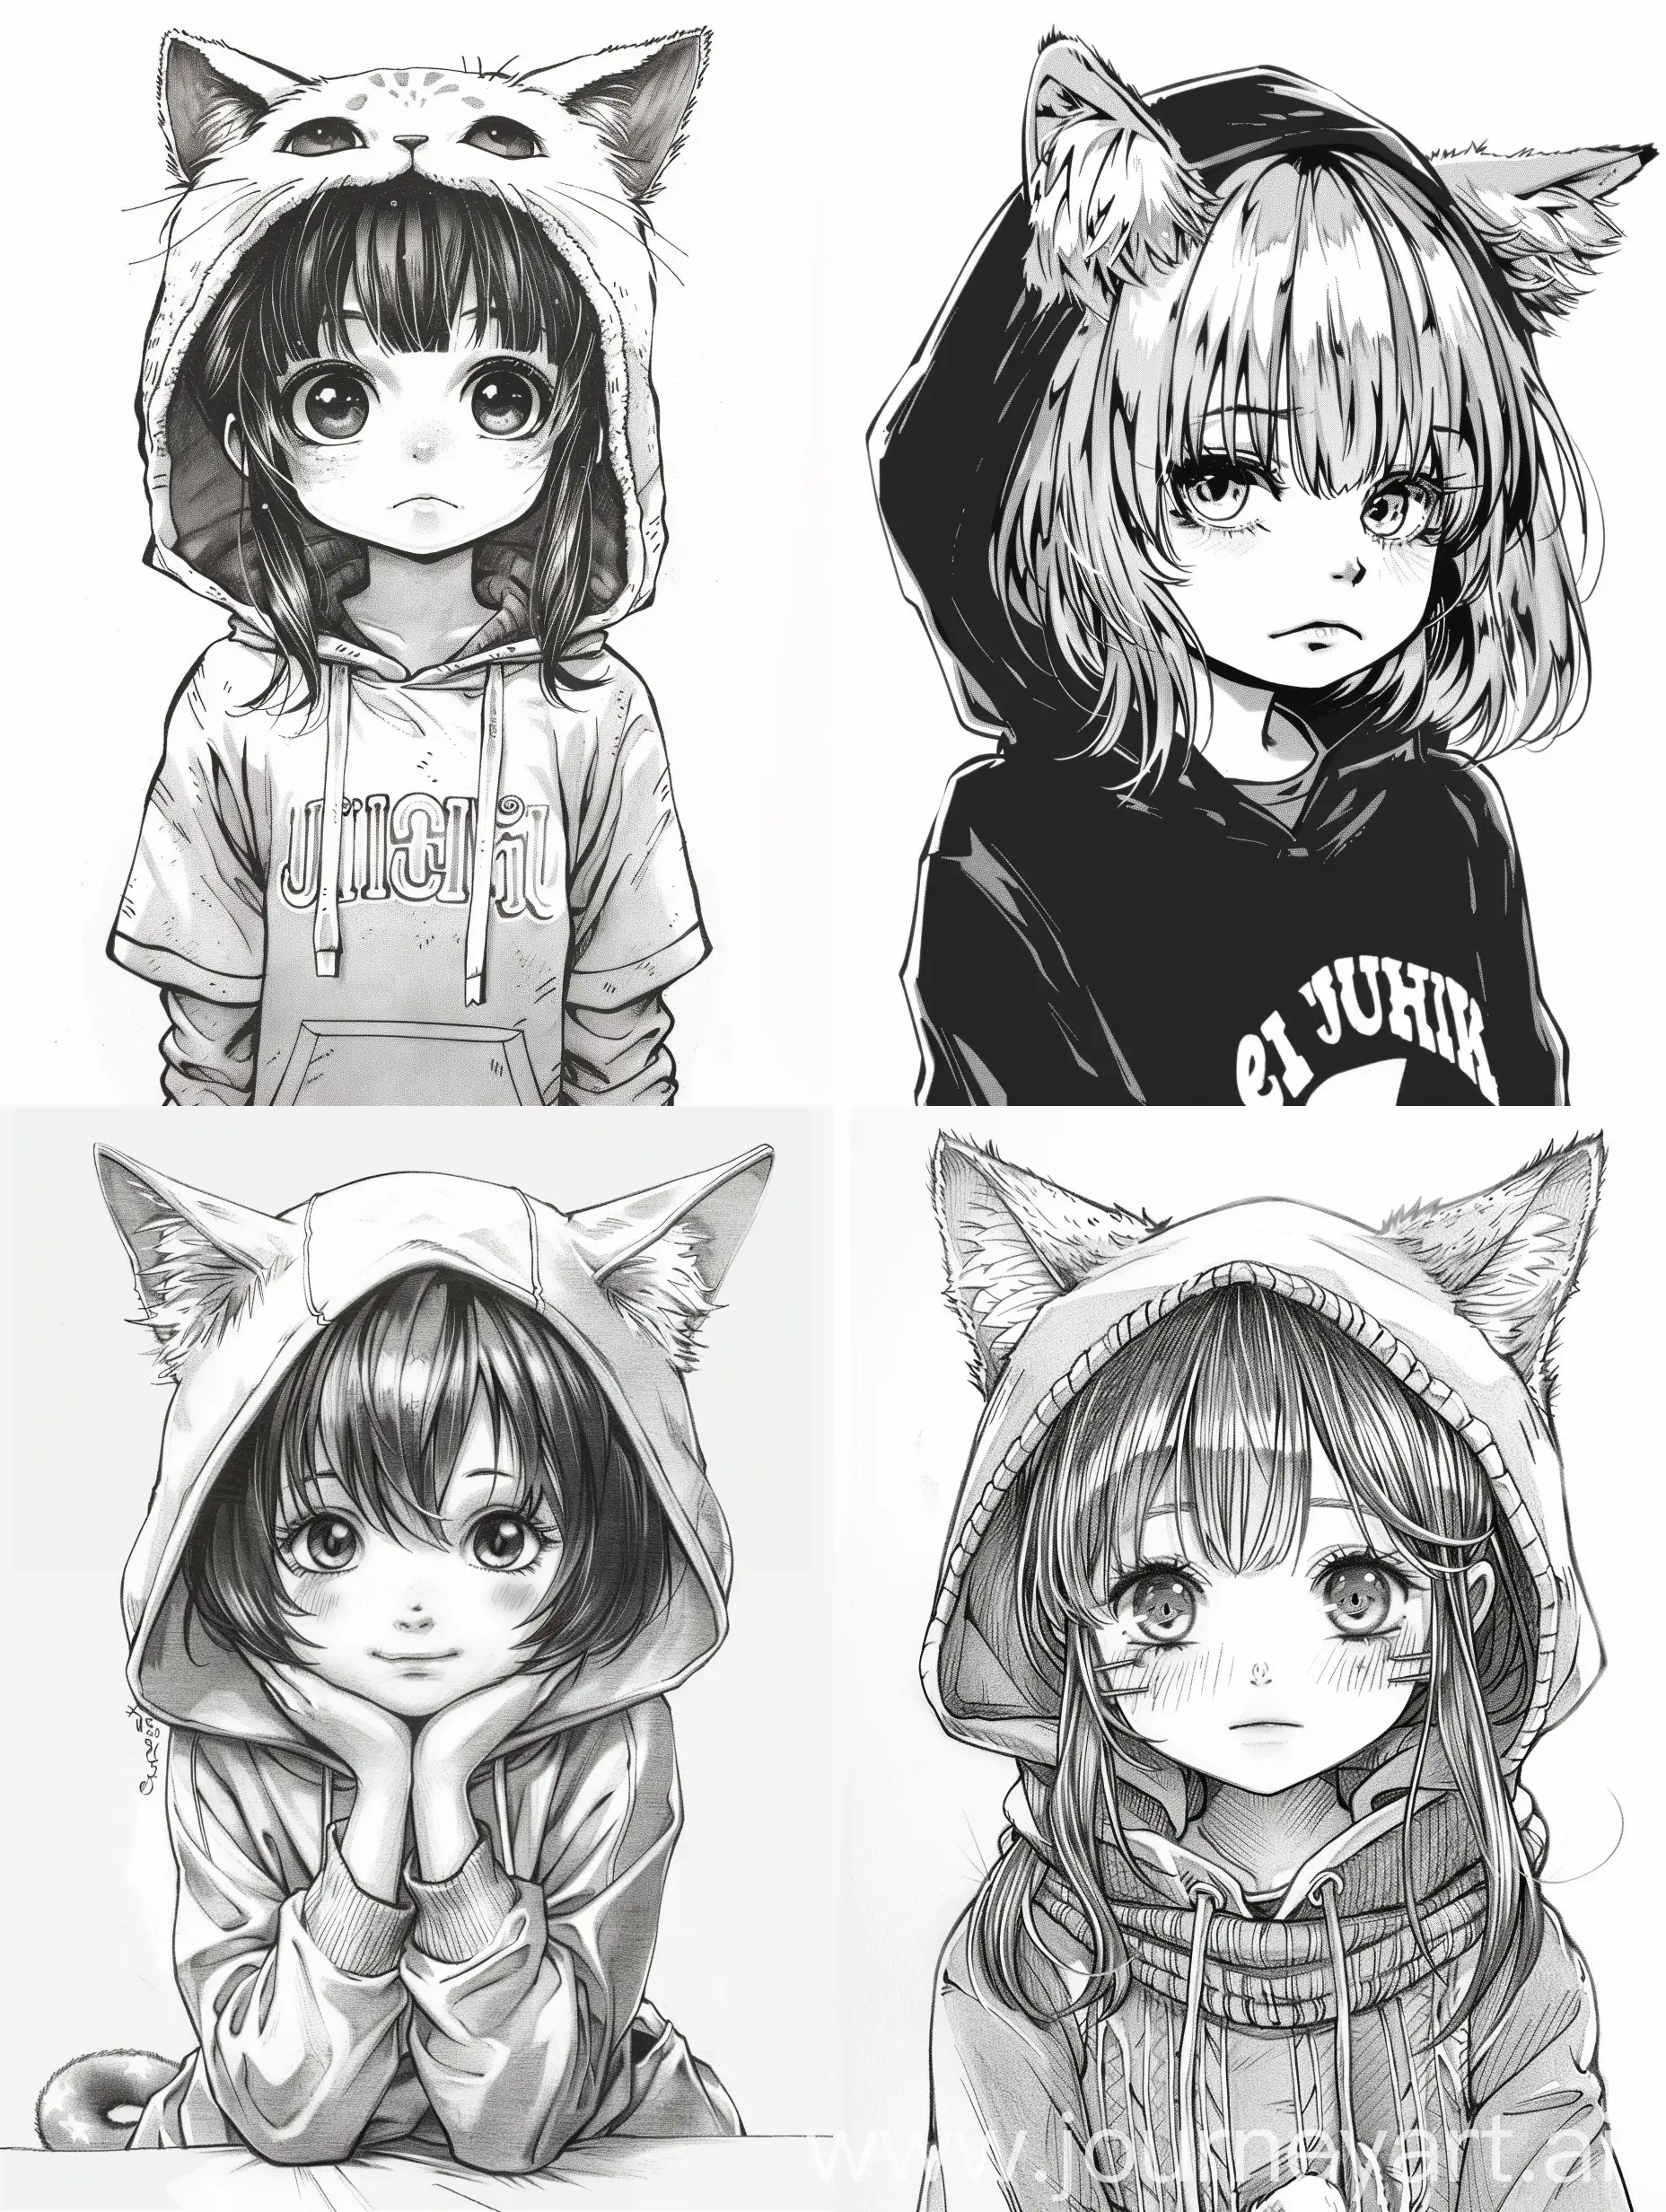 Adorable-6YearOld-Girl-with-Cat-Ear-Hat-in-Manga-Style